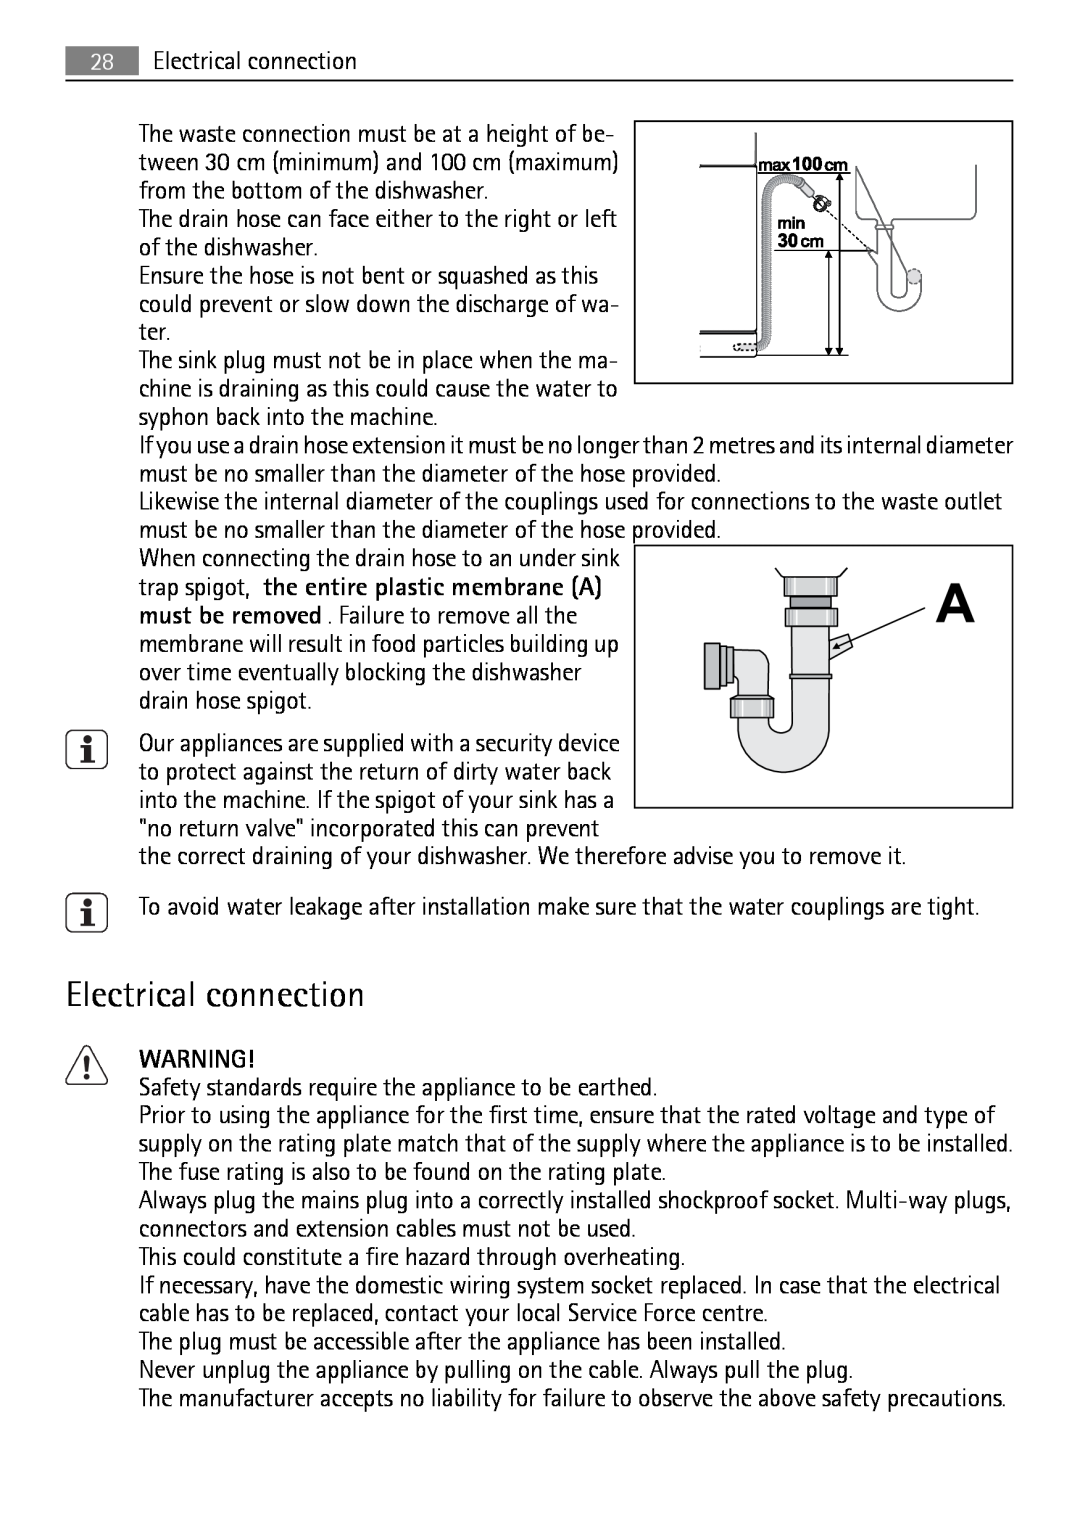 Electrolux QB 5201 user manual Electrical connection 